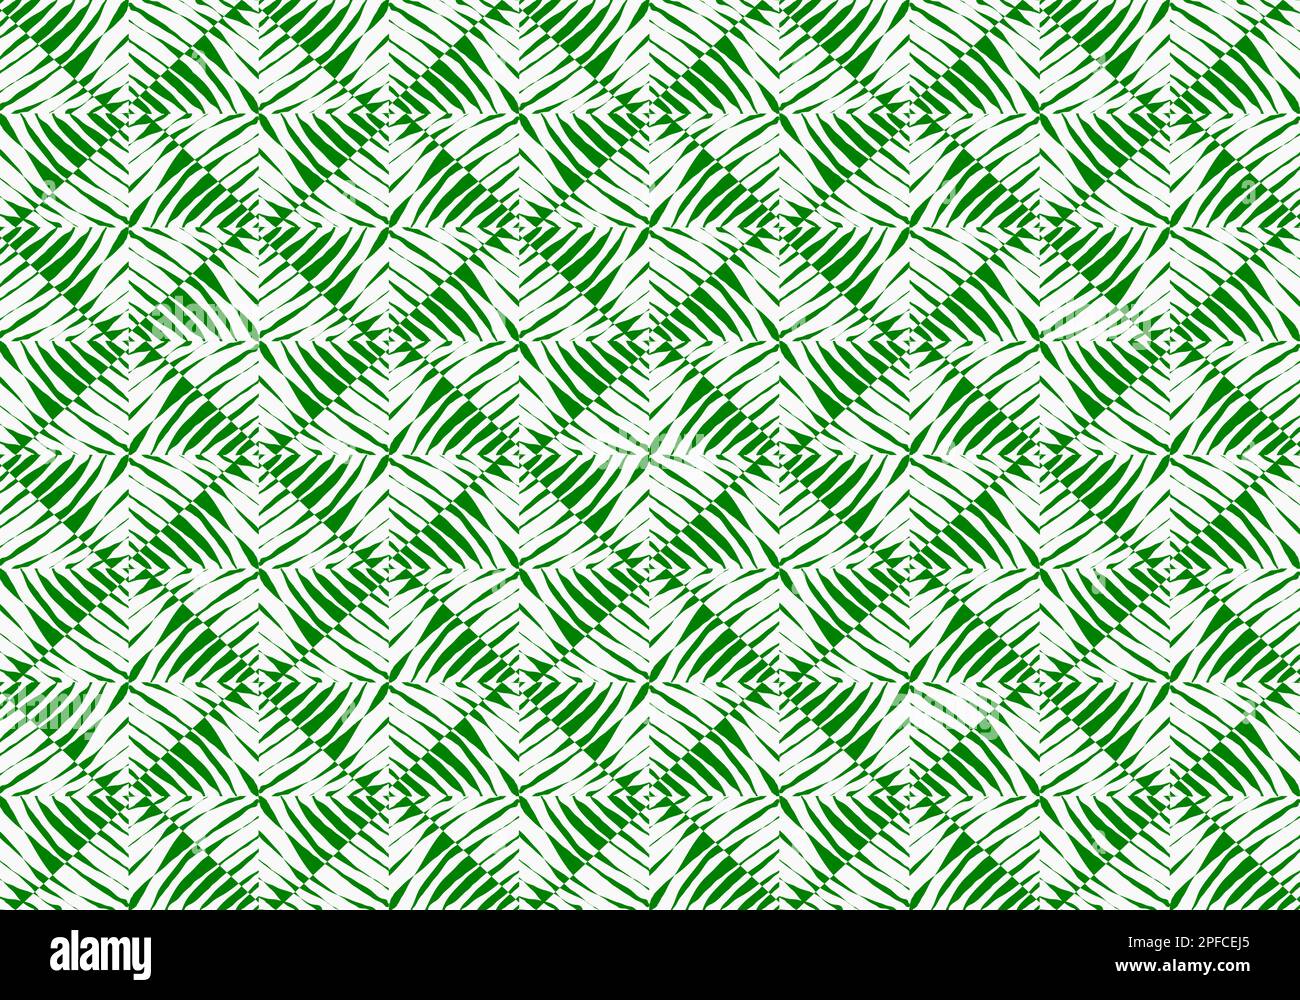 Green Leaf Pattern Mosaic Tiles Design Art for Backgrounds. Seamless Pattern. Mosaic. Geometry. Vector Illustration Graphic Design. Stock Vector